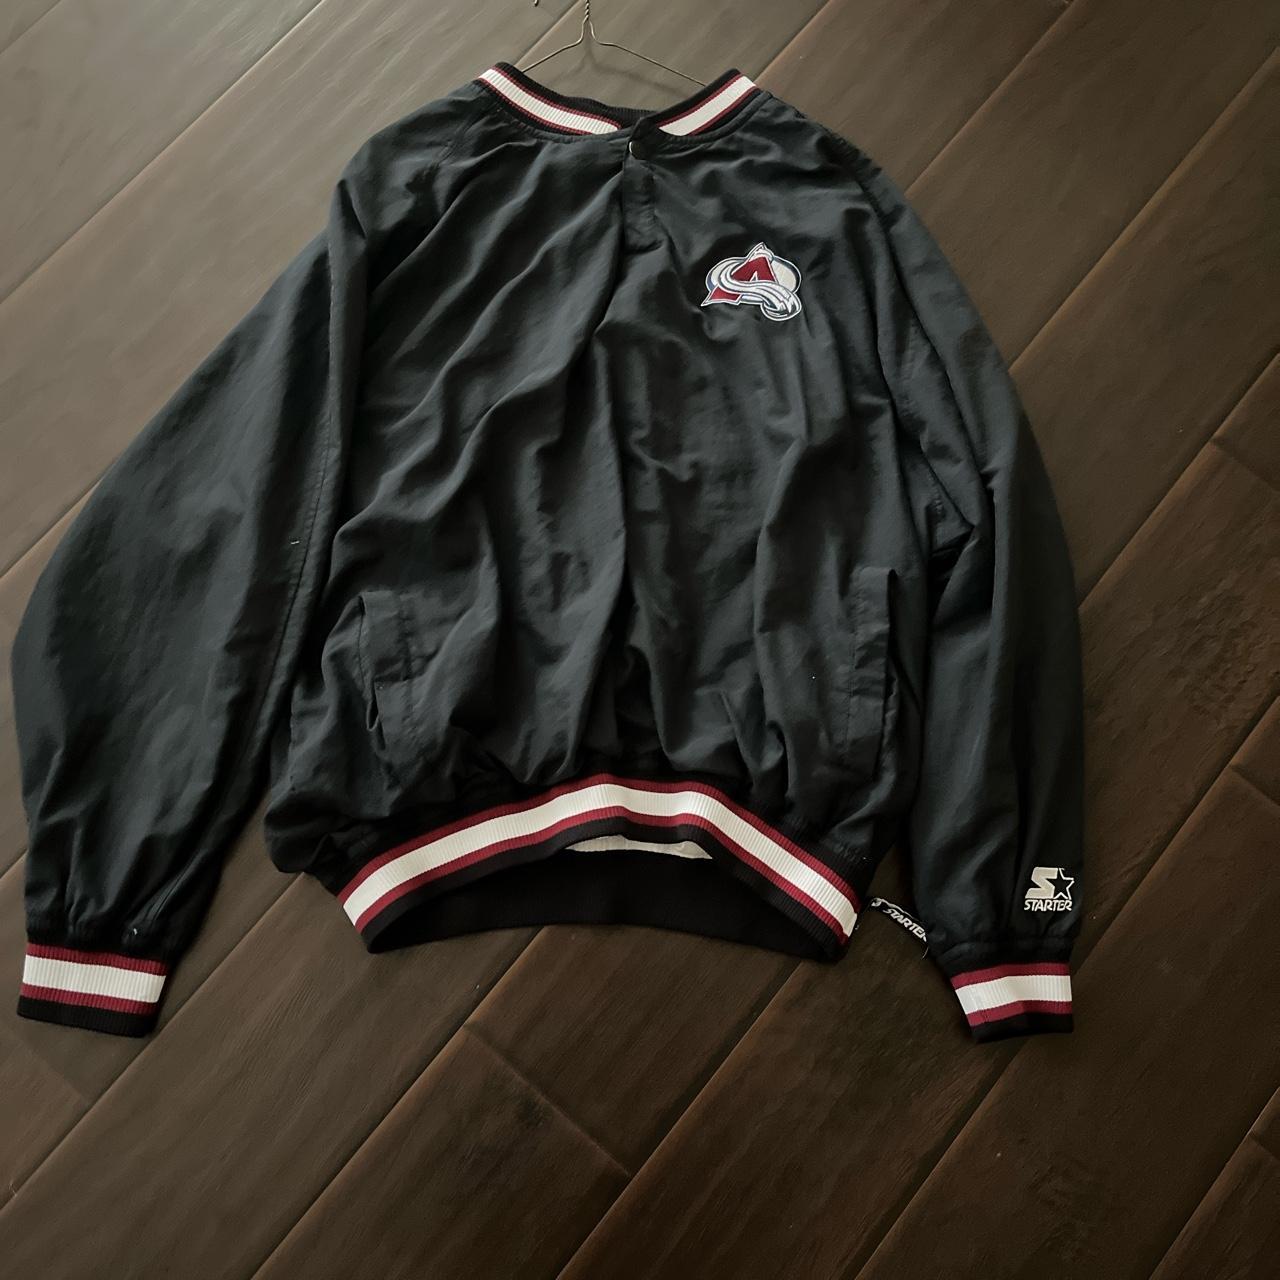 Vintage Avalanche Starter Windbreaker my cousin found for me in a